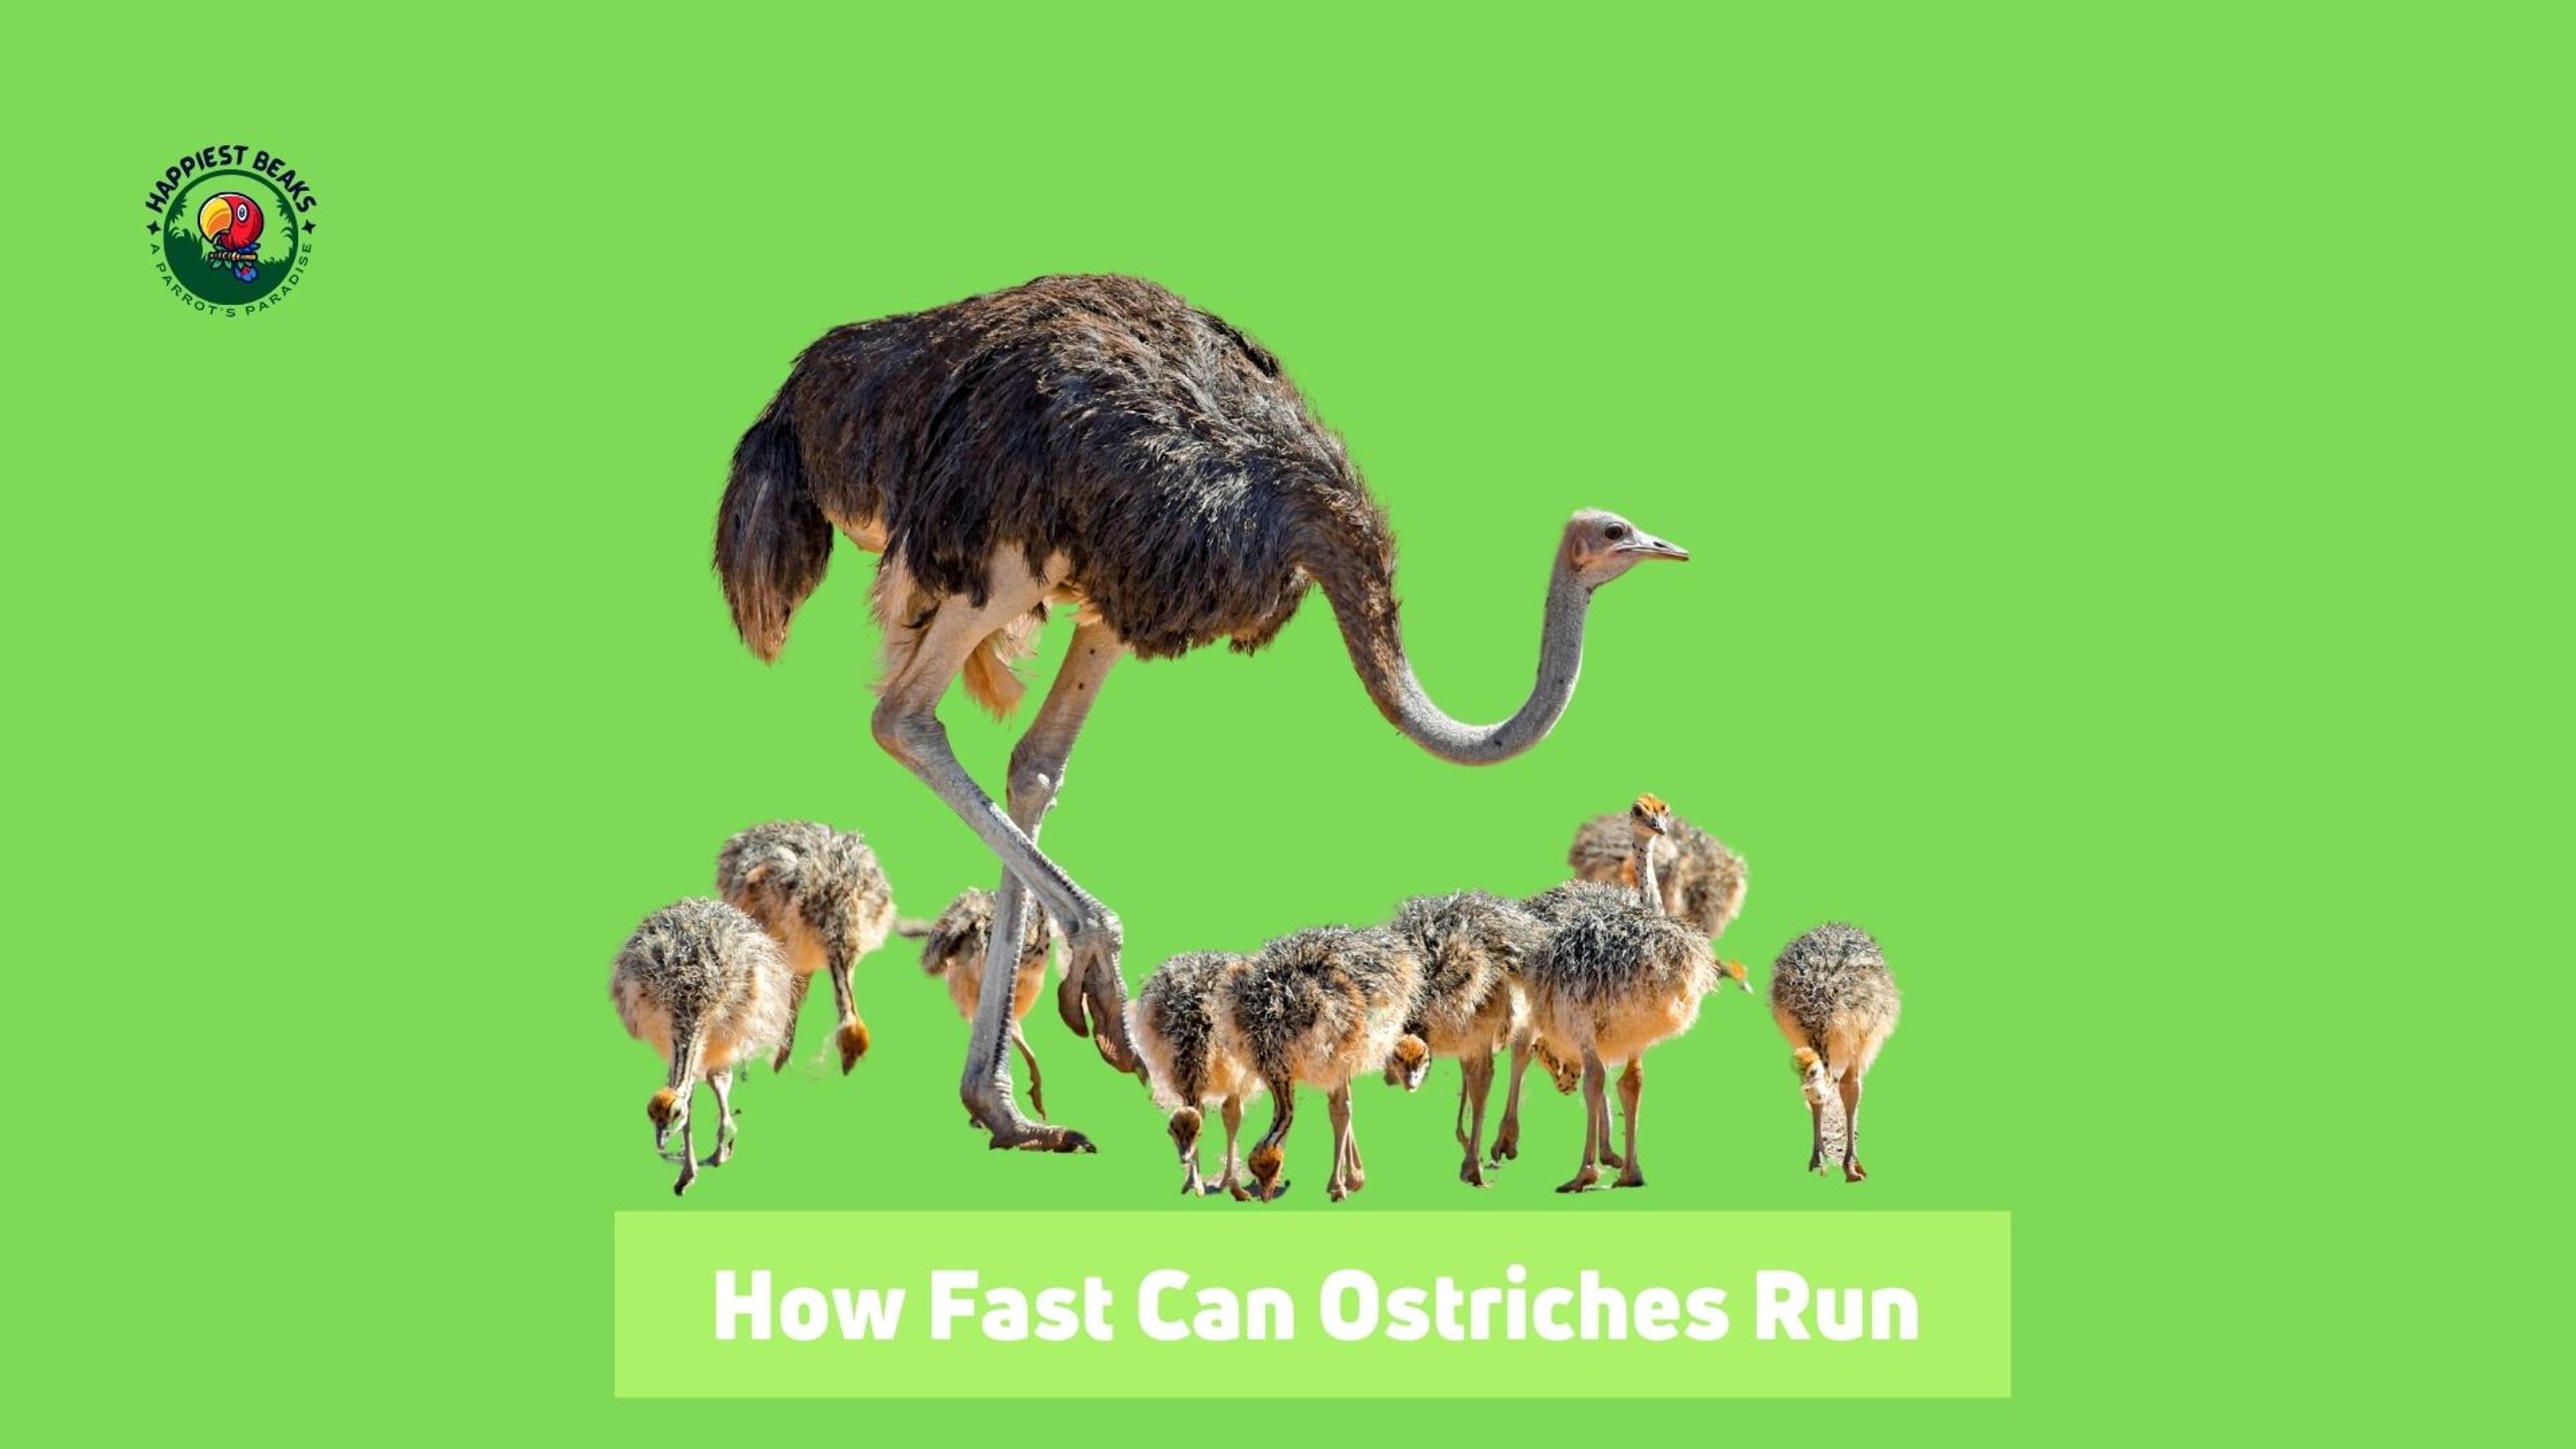 How Fast Can Ostriches Run